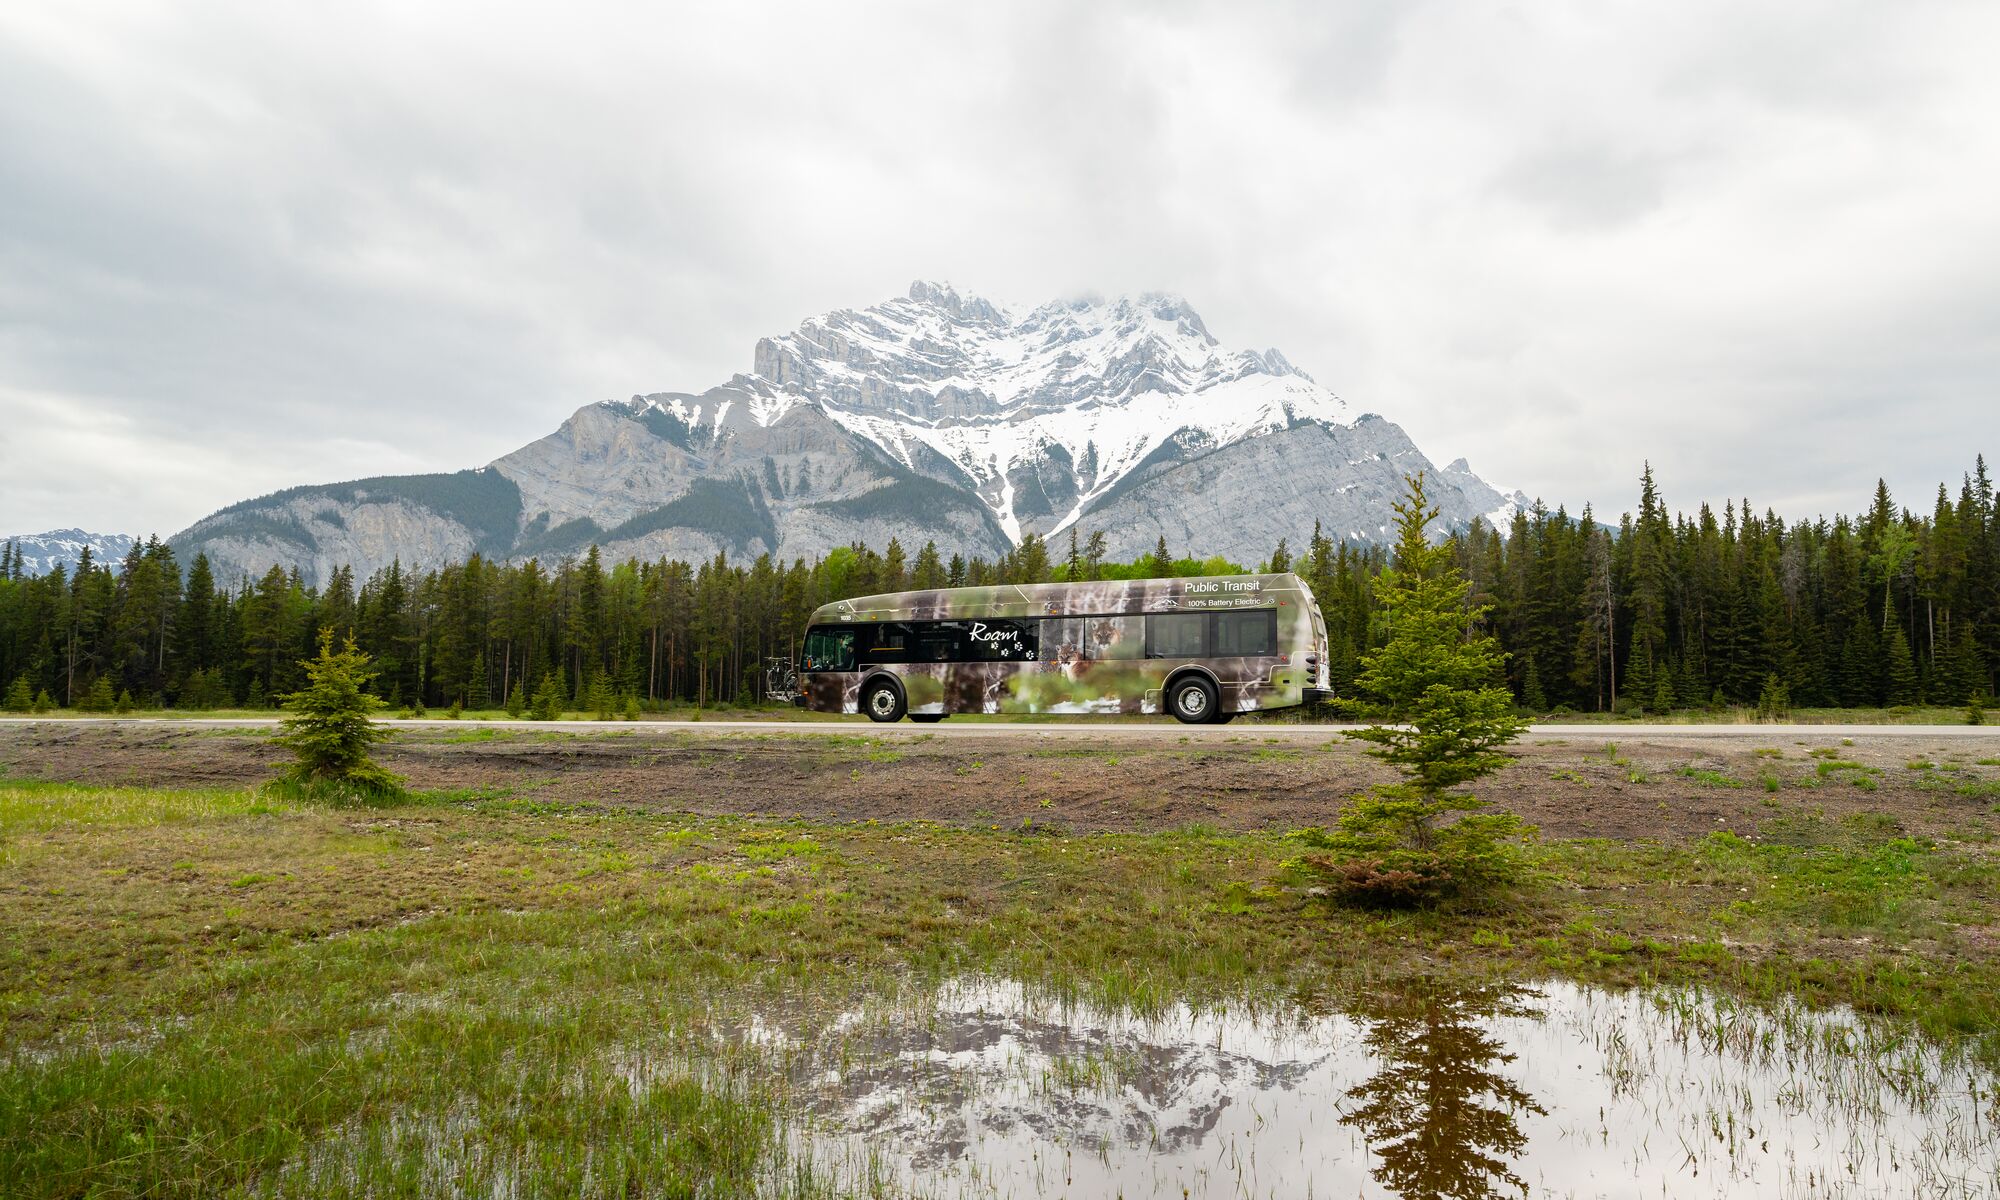 A Roam Transit bus drives on the Lake Minnewanka Loop in Banff National Park with Cascade Mountain in the background and the bus's reflection in a puddle in the grass.